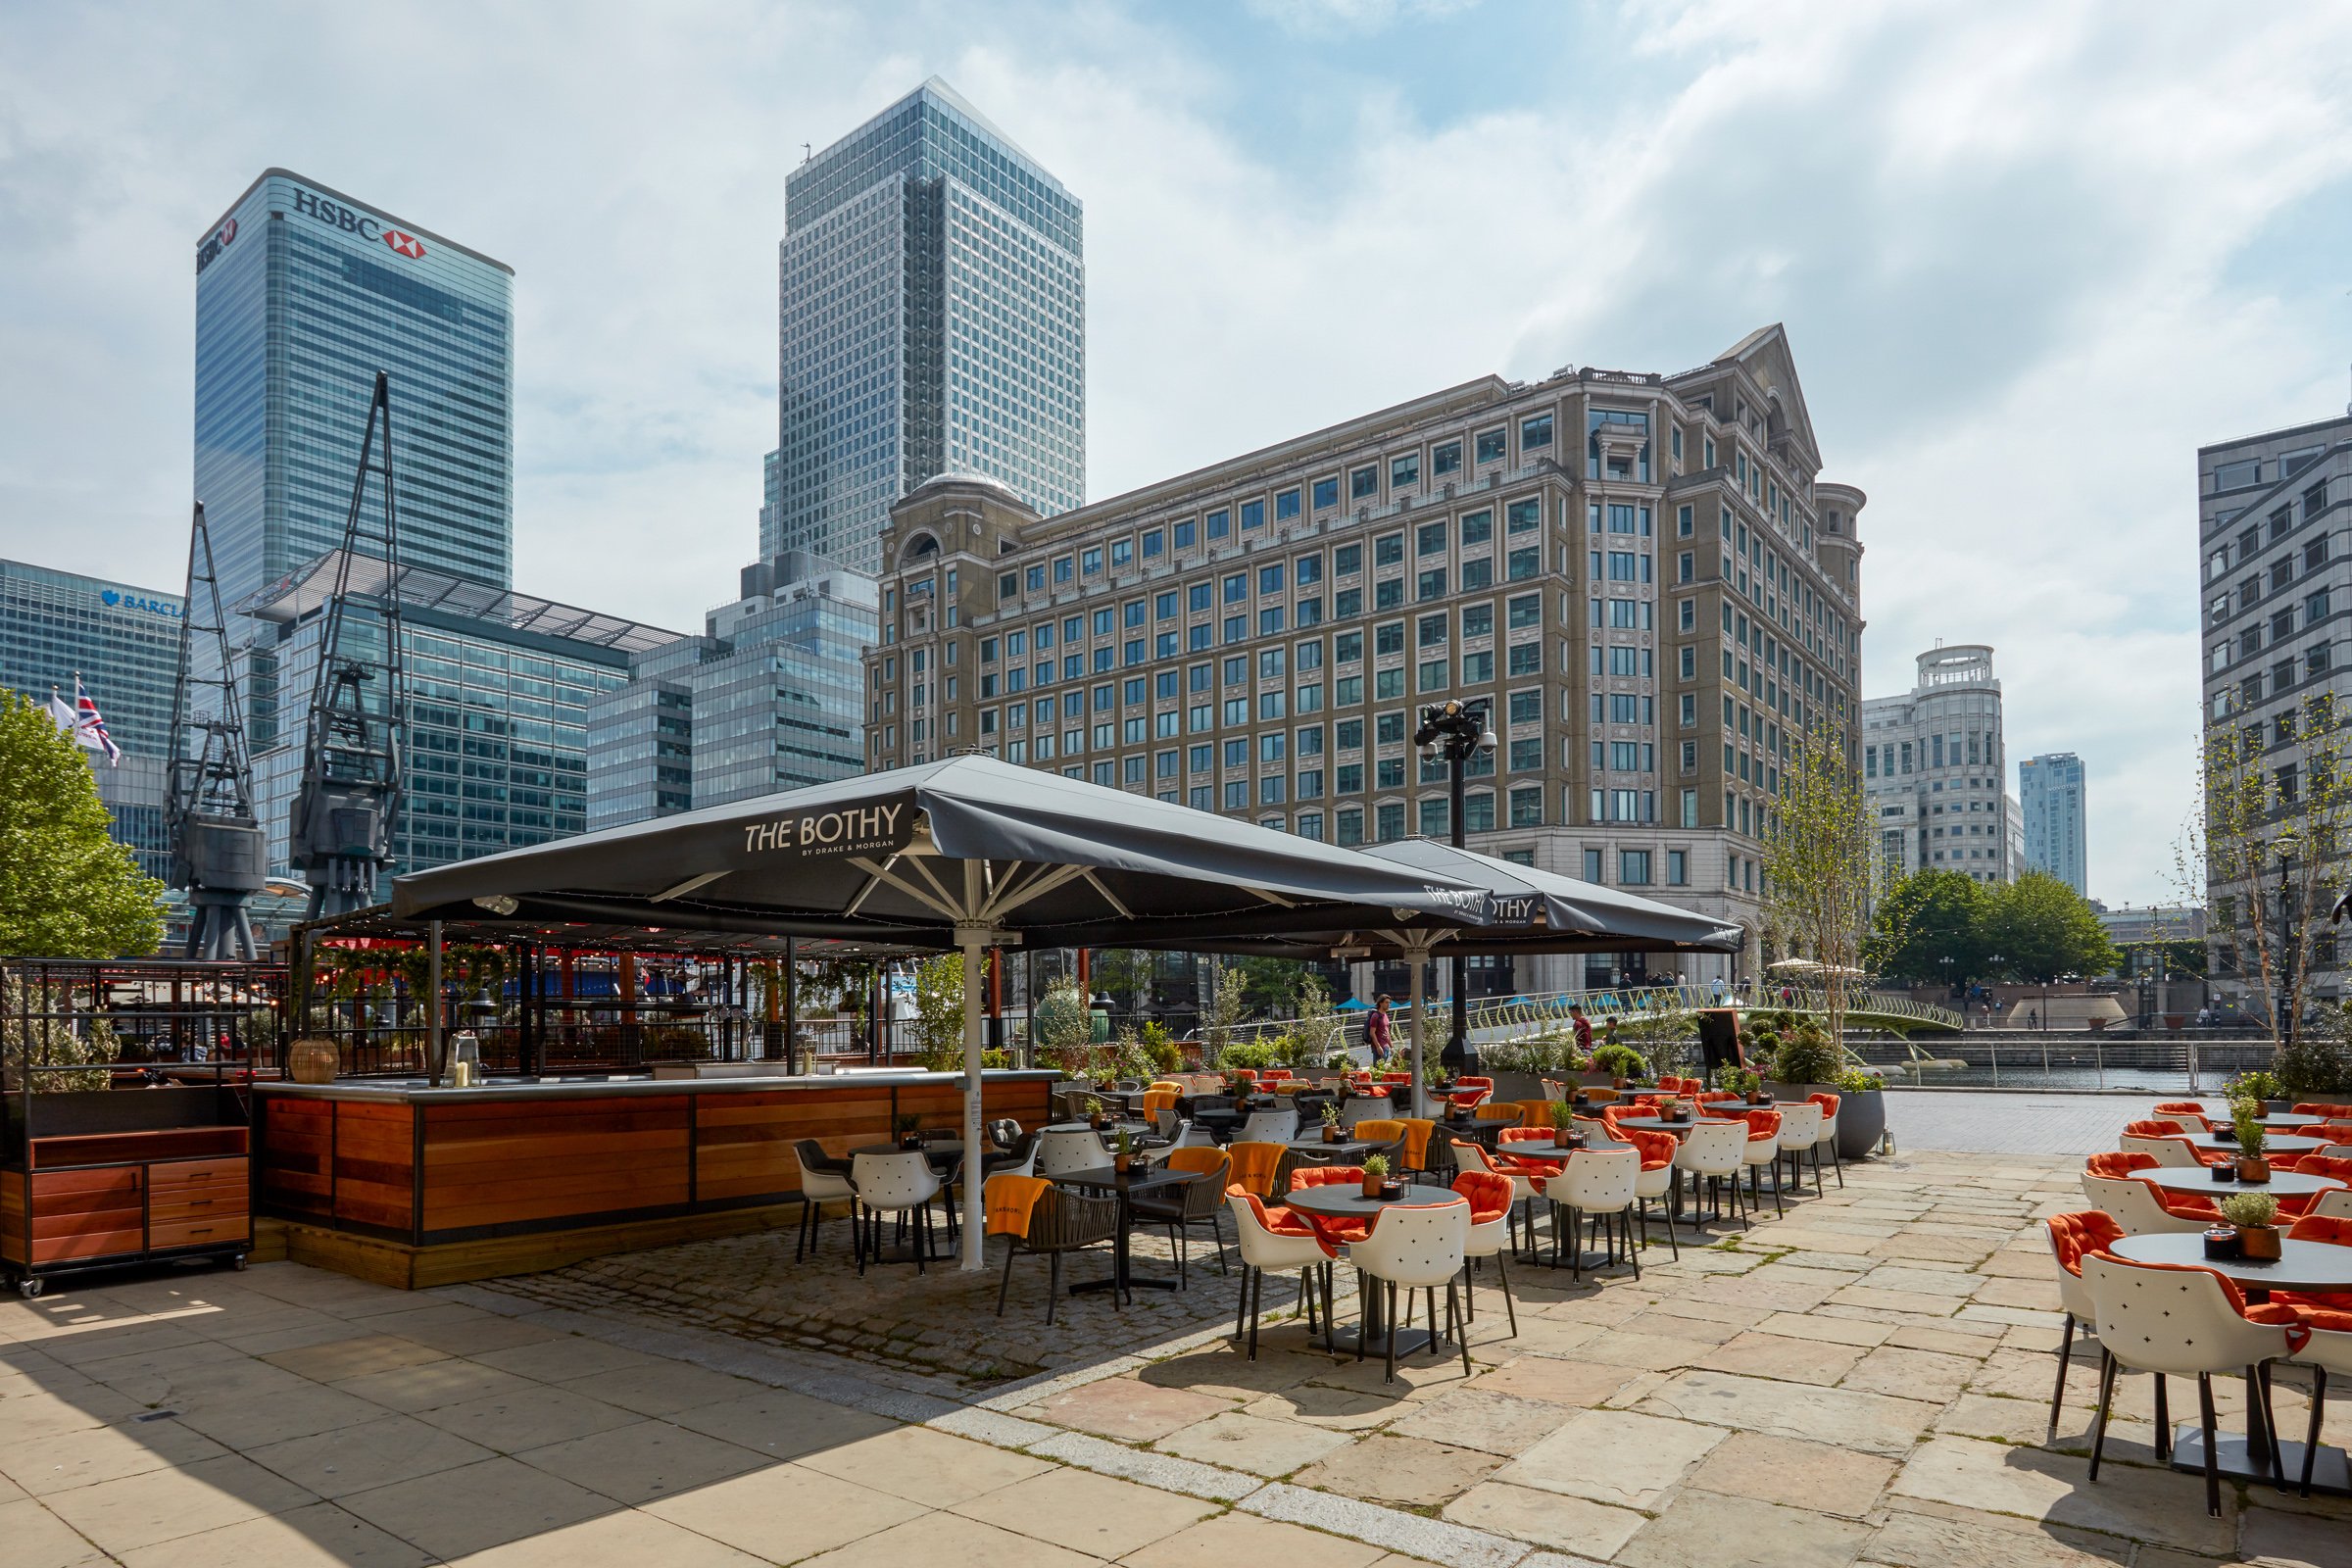 How is Canary Wharf rebuilding itself as a residential area